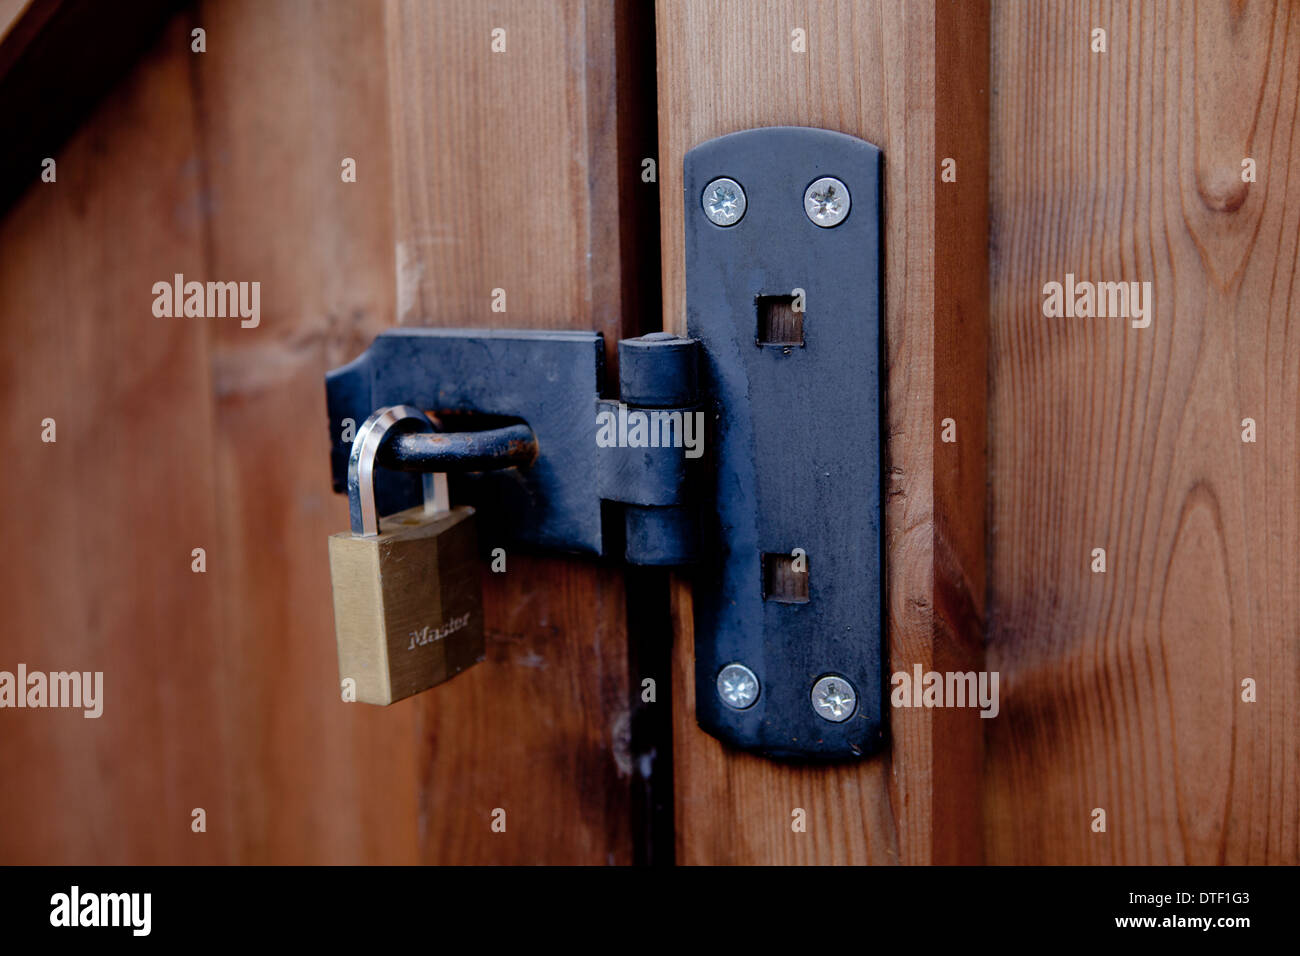 T Shaped Security bar Hasp and Staple  with padlock Stock Photo